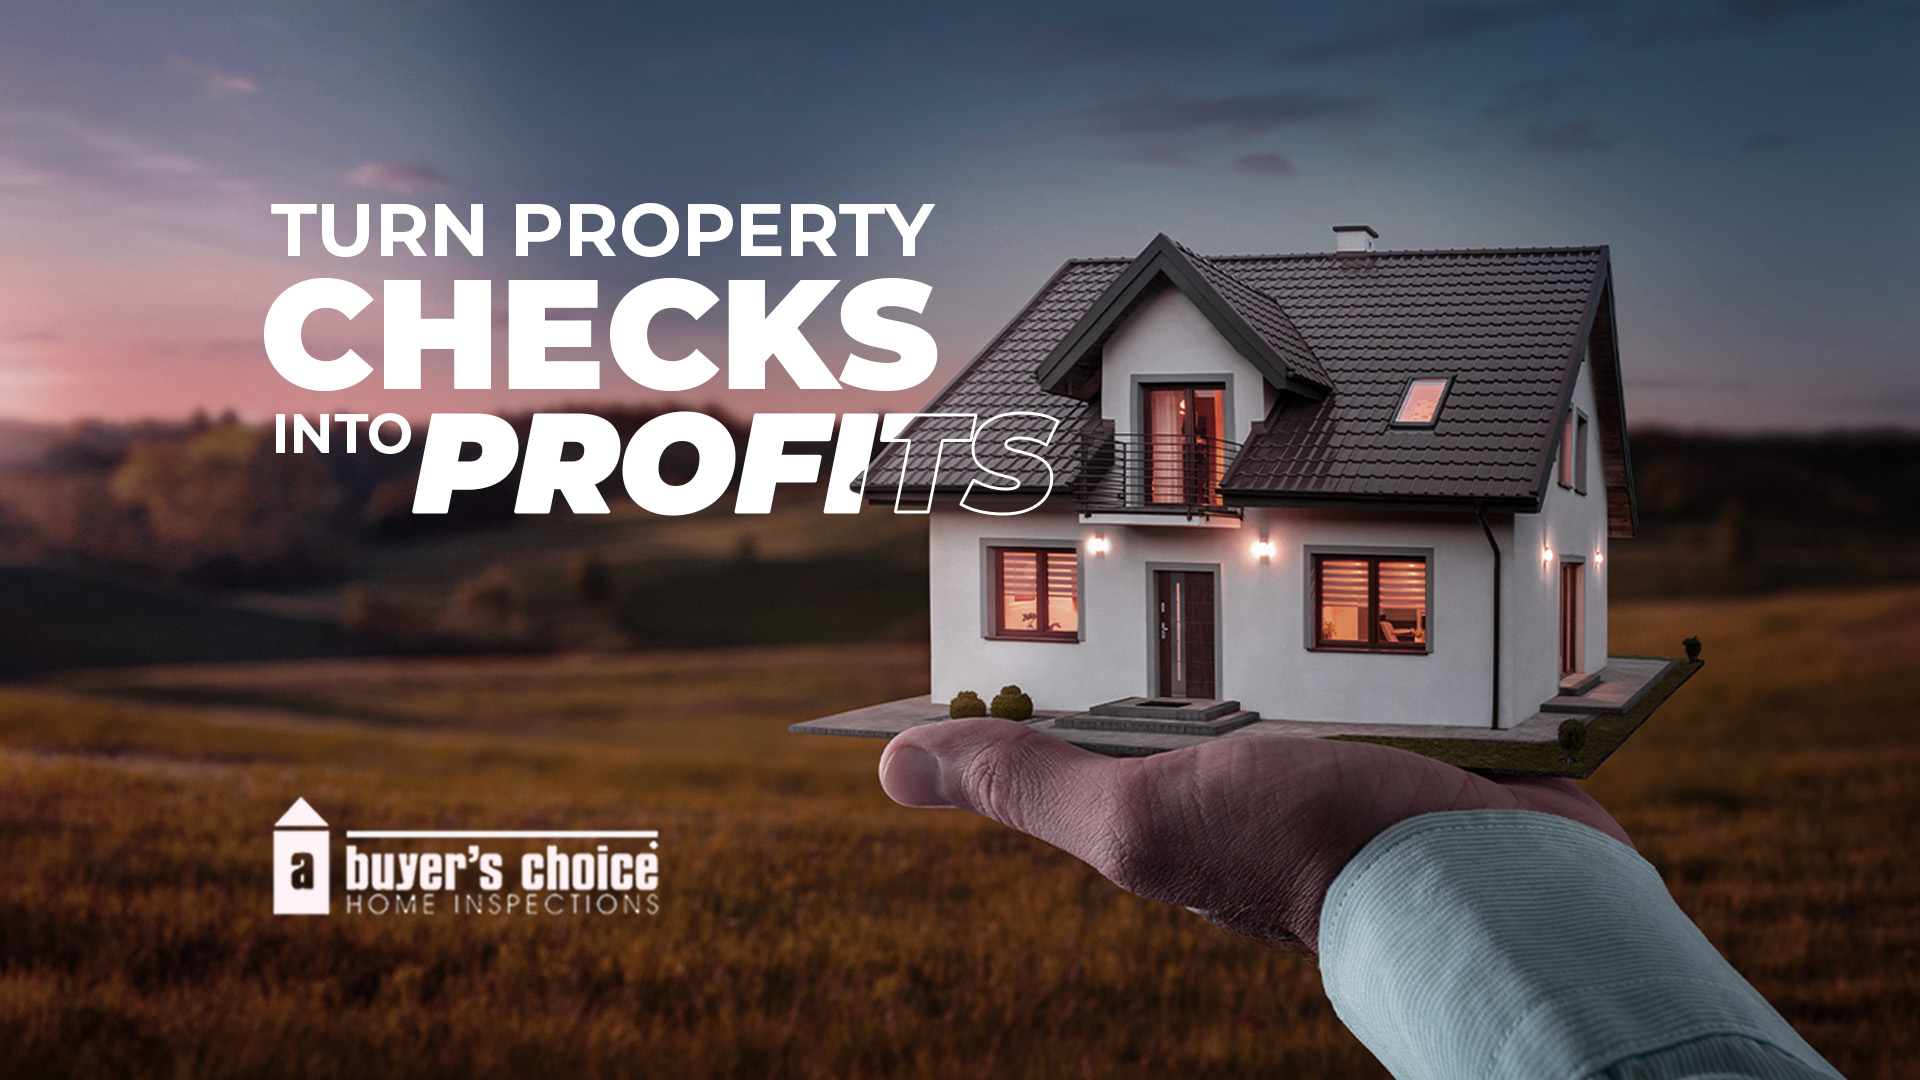 A Buyer's Choice Home Inspections franchise